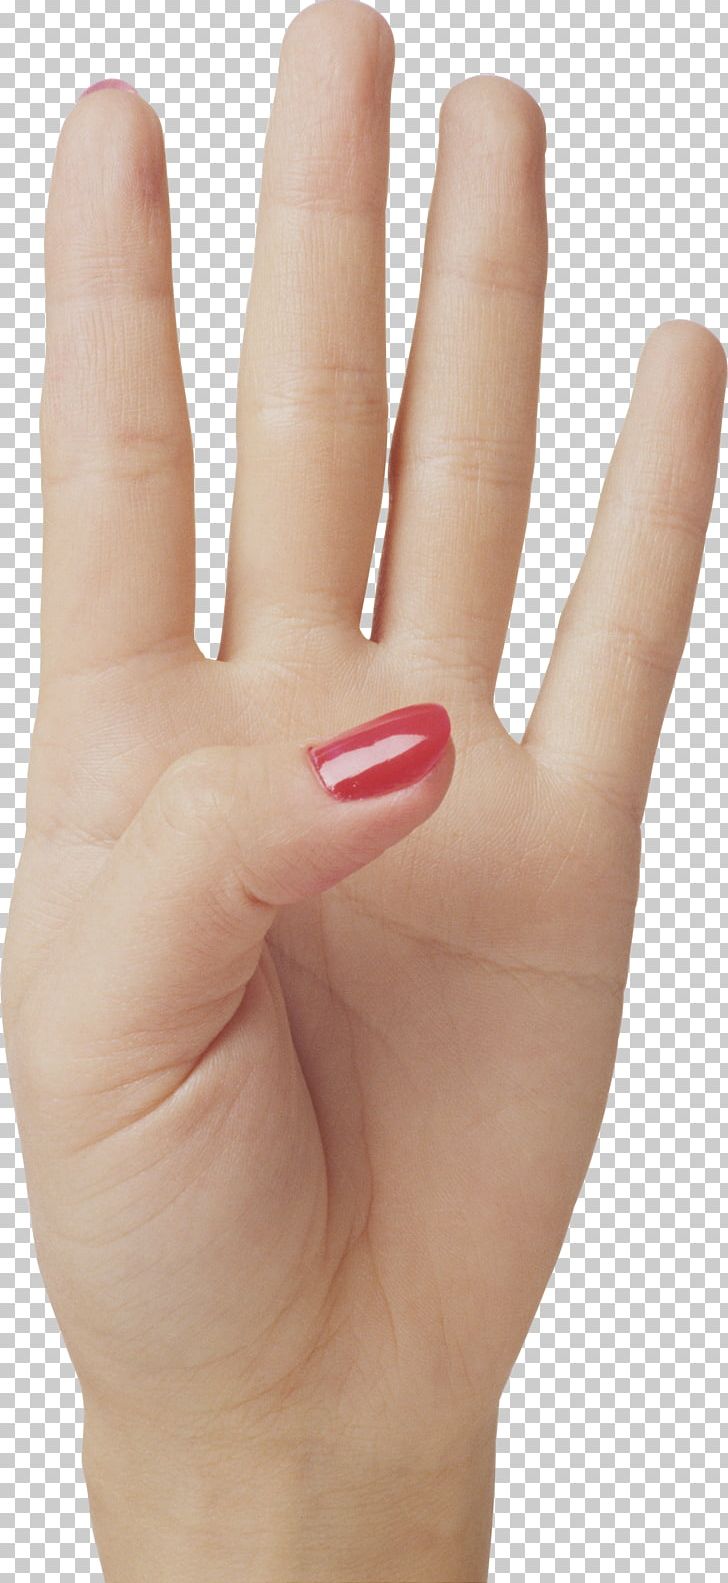 Hand Chunk Computer File PNG, Clipart, Chunk, Computer File, Computer Icons, Digit, Download Free PNG Download